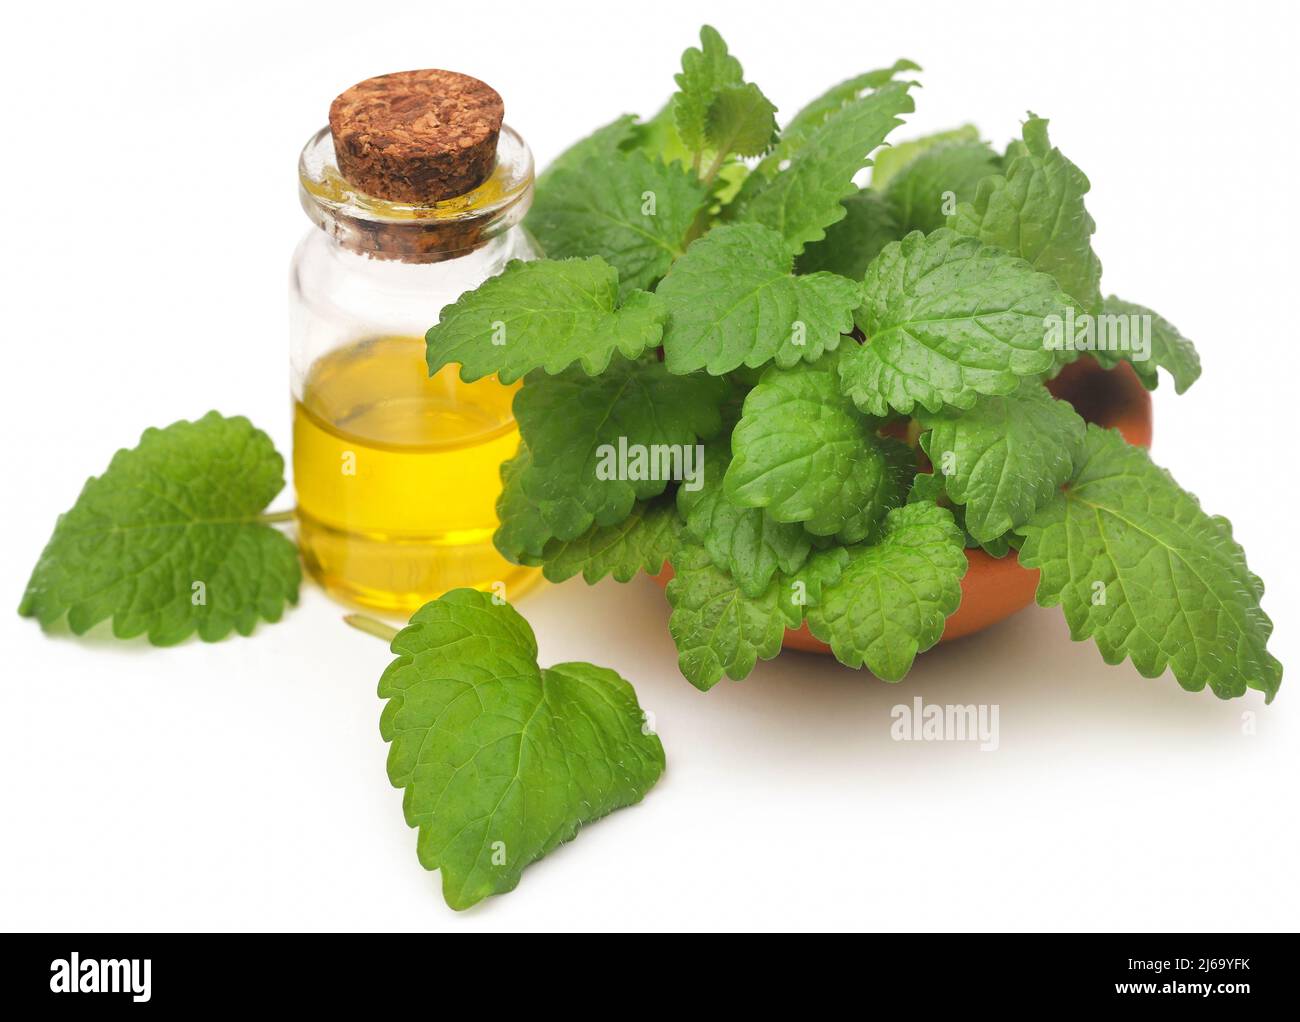 Lemon balm leaves with extracted essential oil in bottle over white background Stock Photo